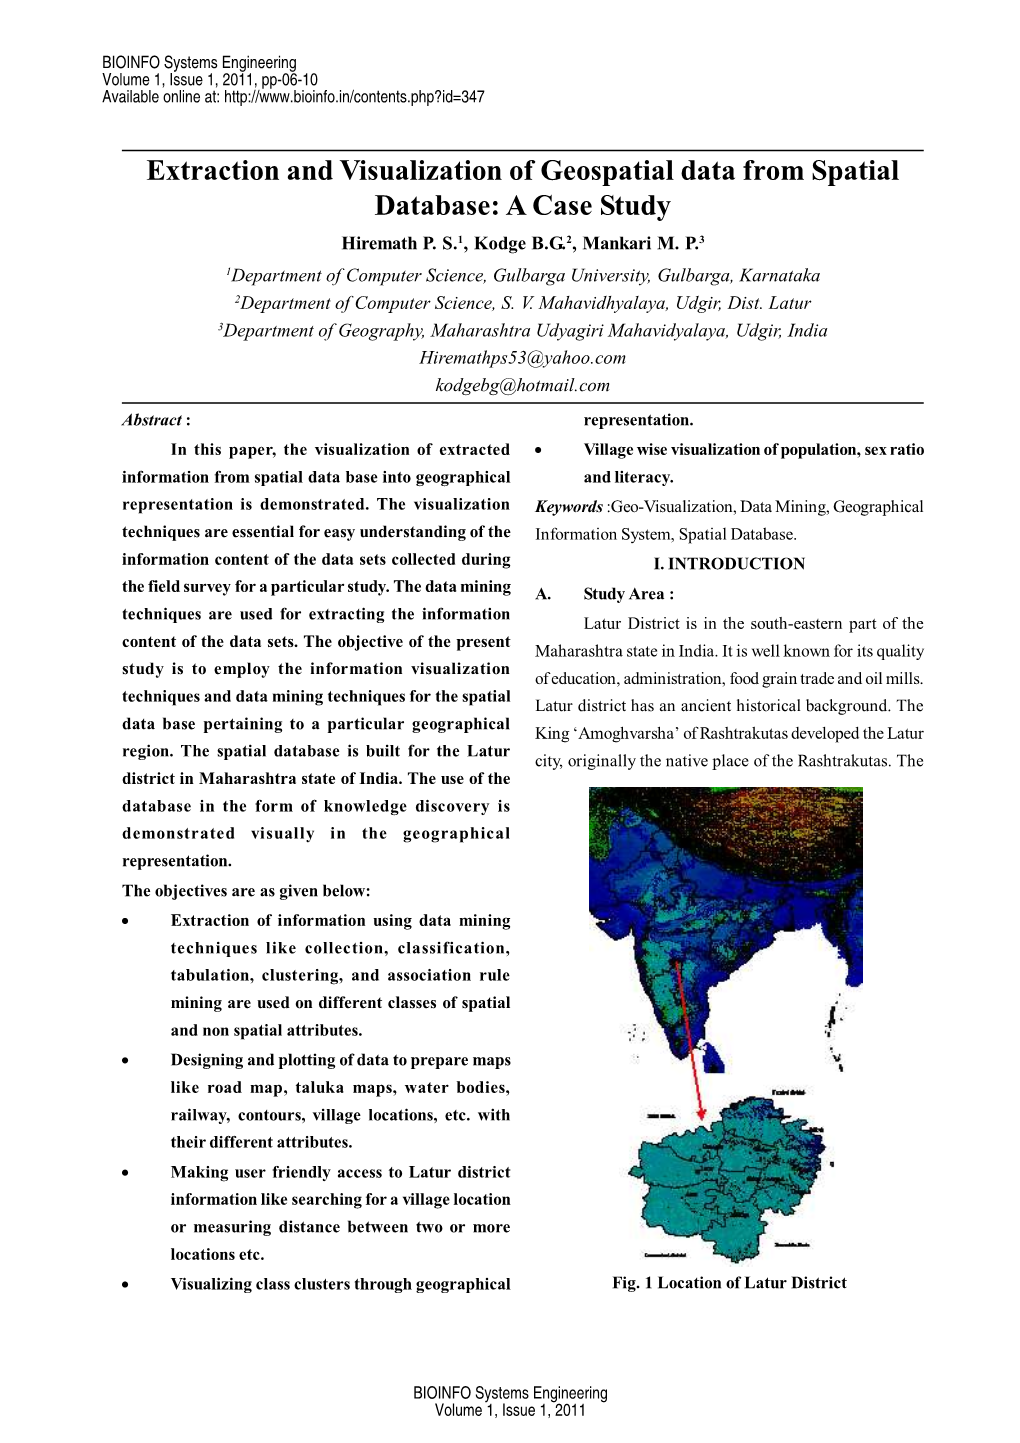 Extraction and Visualization of Geospatial Data from Spatial Database: a Case Study Hiremath P